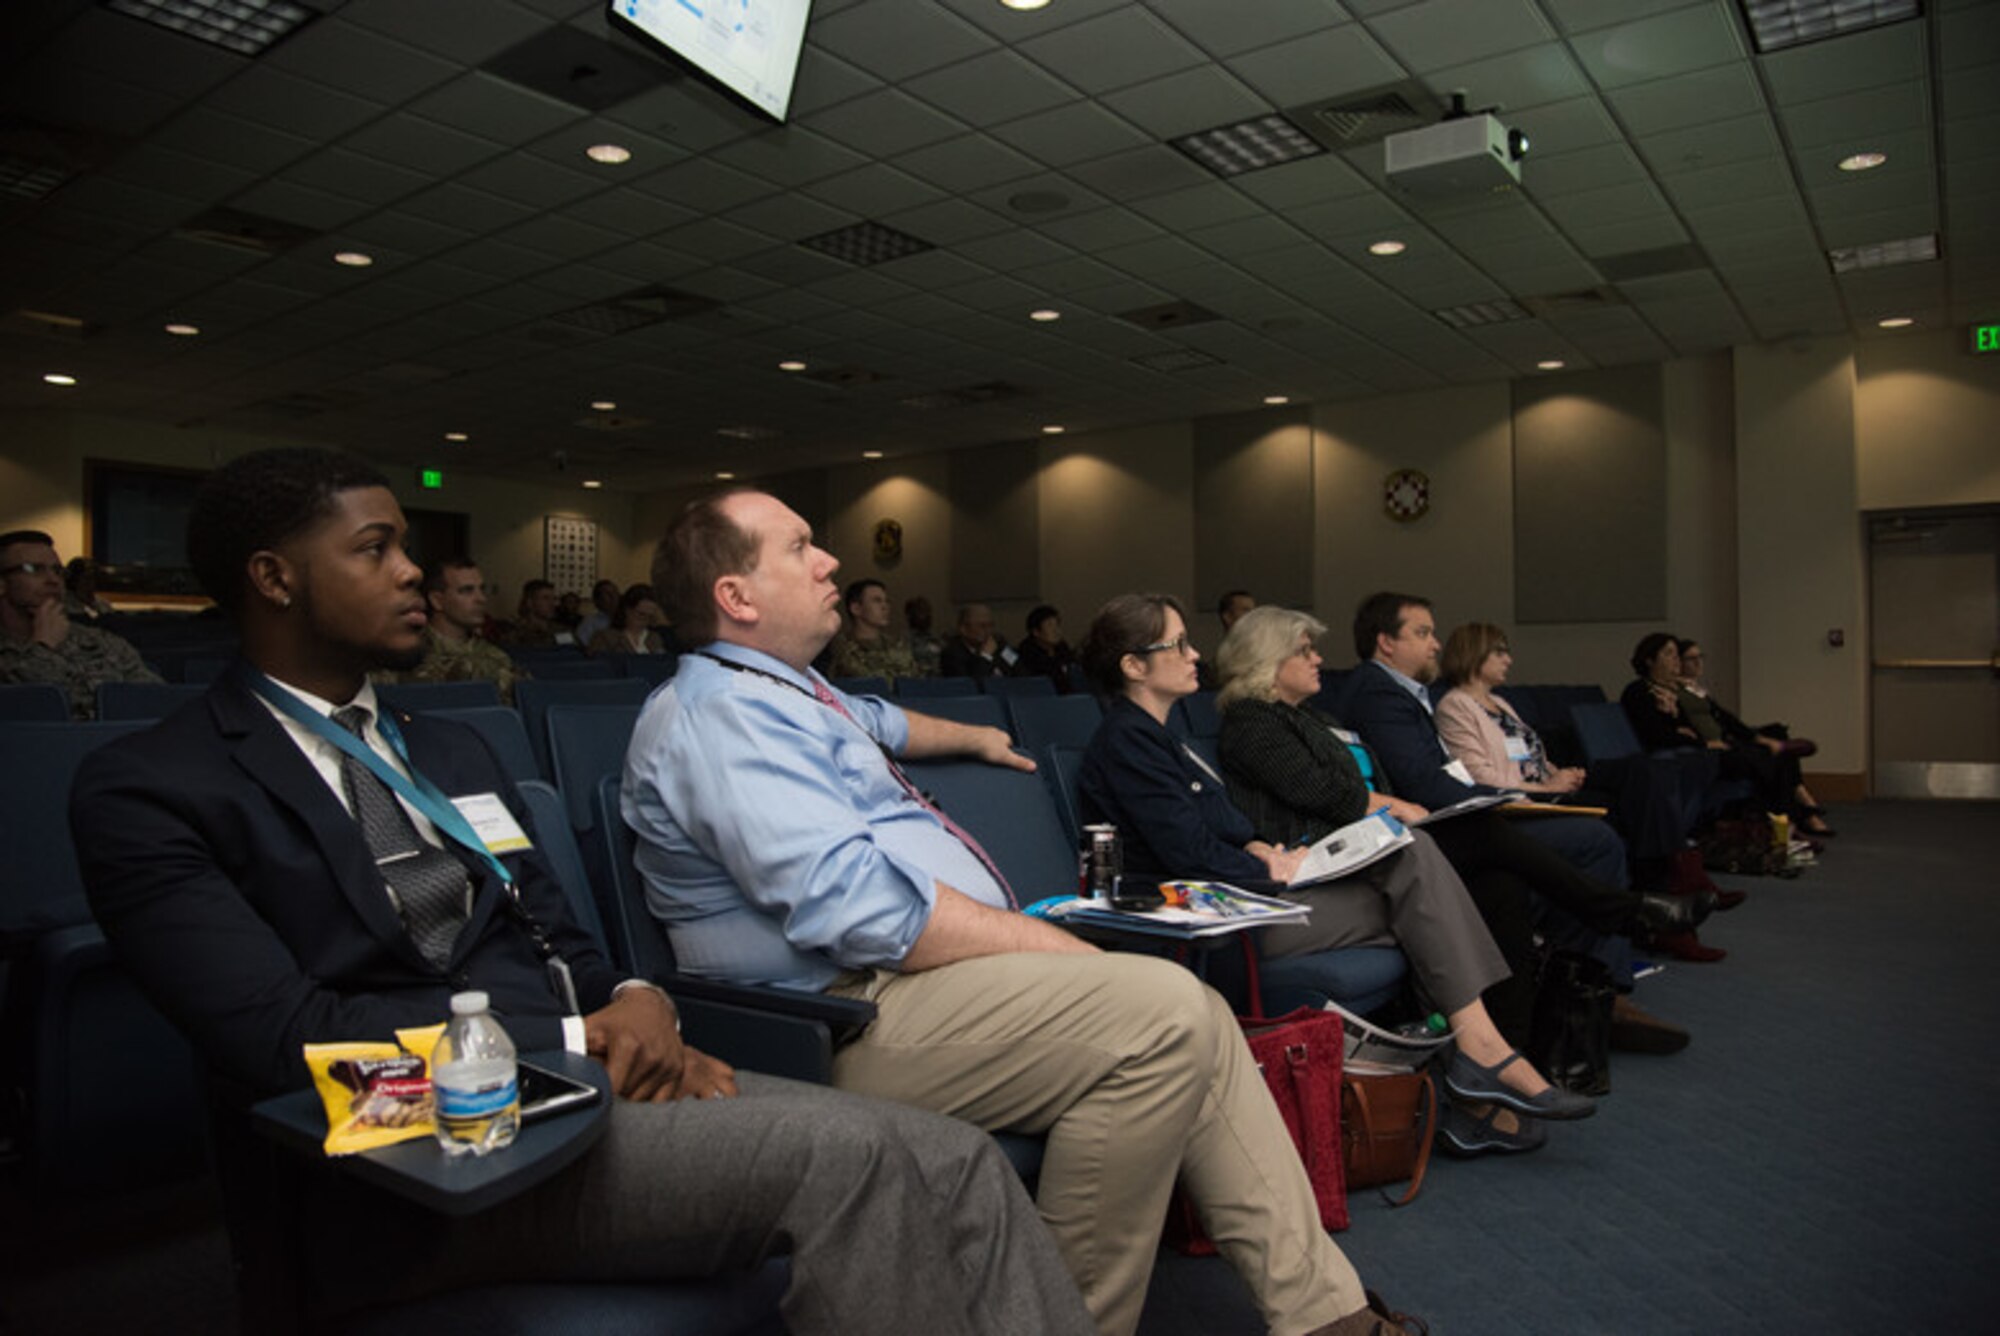 Attendees of the Language, Regional Expertise and Culture Symposium listen to Dr. Paul Fox, New Castle University’s School of Arts and Cultures principal research associate, March 28, 2019, Maxwell Air Force Base, Alabama. Fox educated the attendees about The Cultural Property Protection Estimate and how it can be used as an interoperability planning tool. (U.S. Air Force photo by Senior Airman Alexa Culbert)